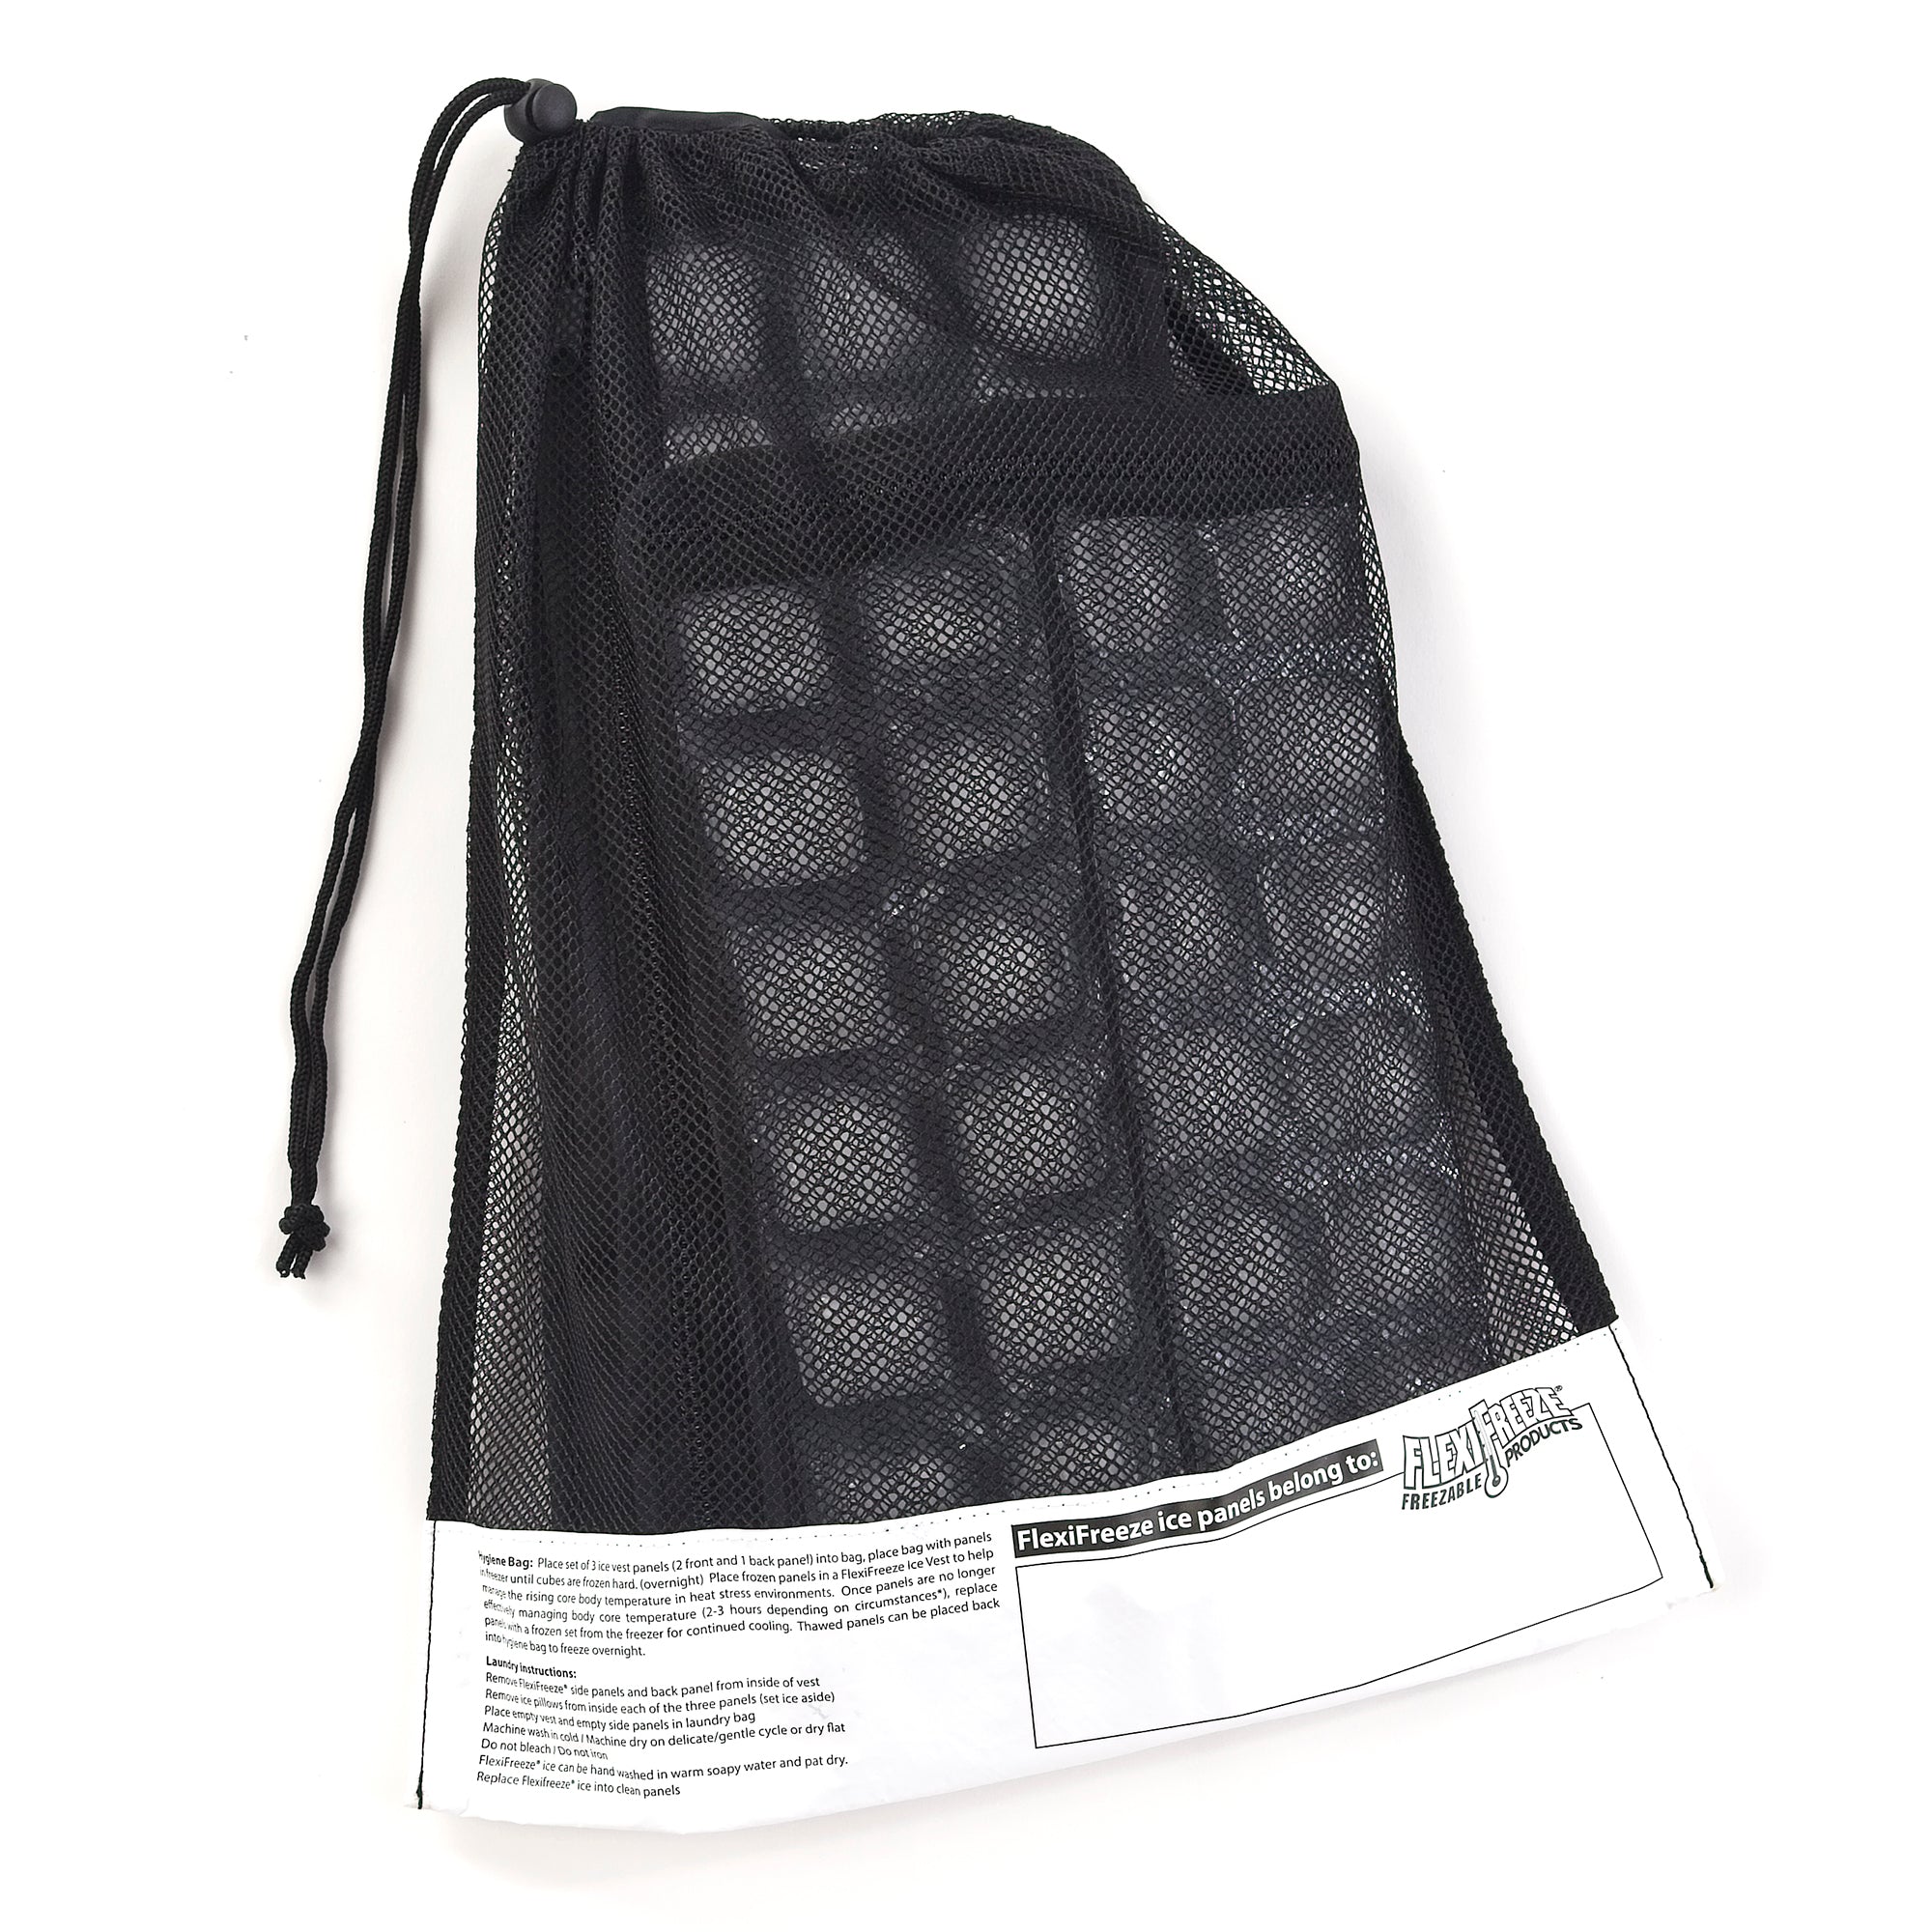 FlexiFreeze refreezable ice panels in mesh bag for FlexiFreeze personal cooling ice vest